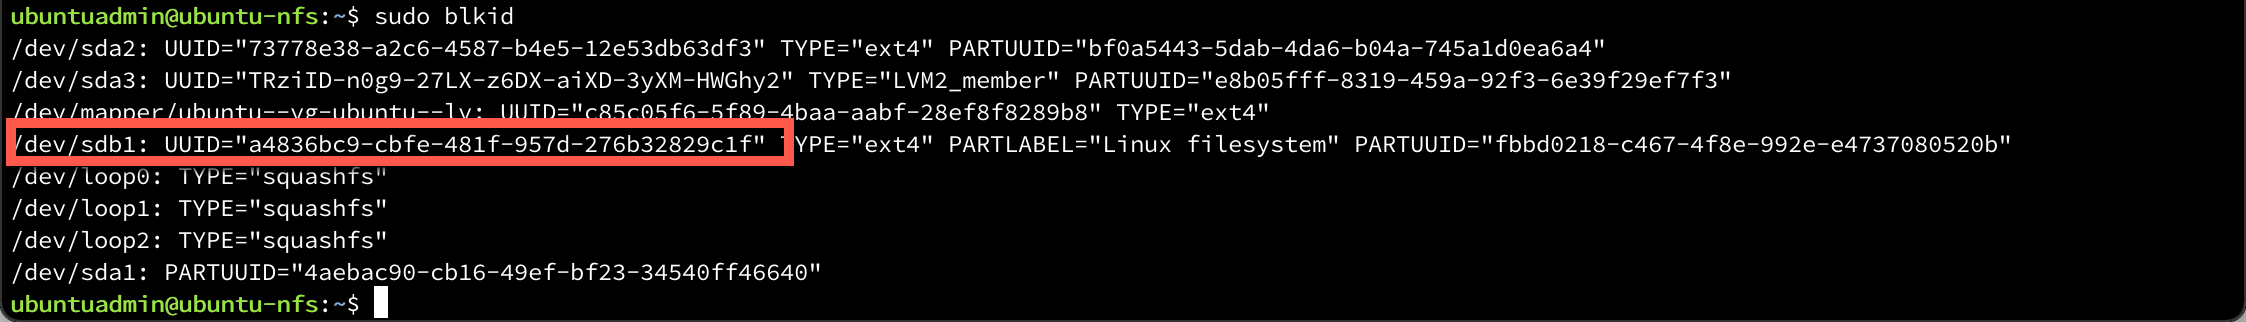 UUID of the partition